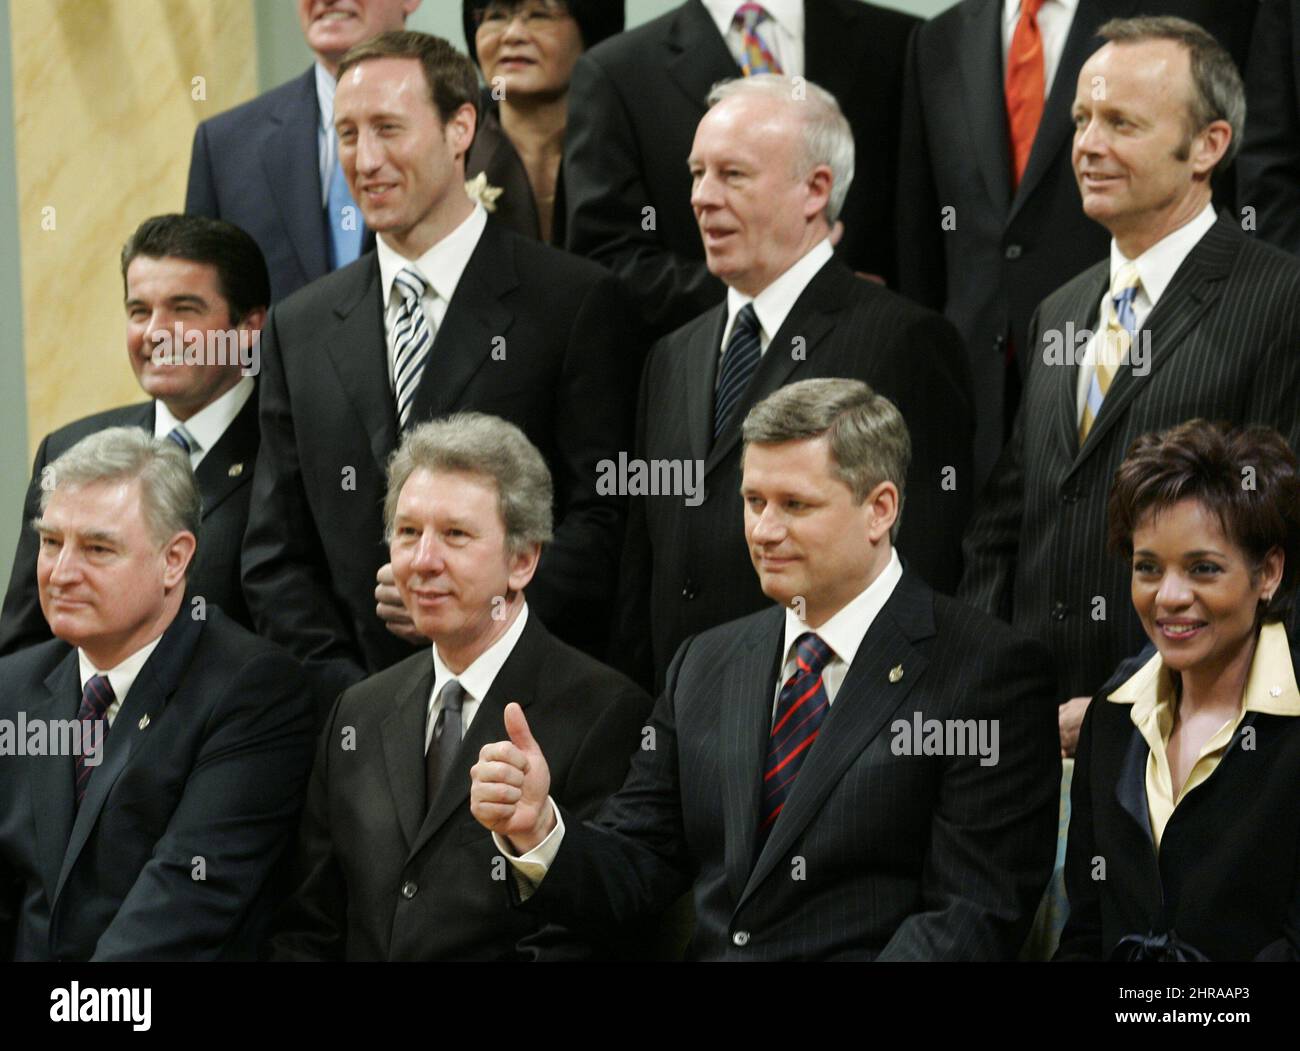 Prime Minister Stephen Harper (bottom row, second from right) gives the thumbs as he and members of his new cabinet pose for a photograph with Governor General Michaelle Jean (bottom row, far right) after a swearing-in ceremony in Ottawa, Monday, Febuary 6, 2006. Front row (left to right) David Emerson, Minister of International Trade and Pacific Gateway and the Vancouver-Whistler Olympics, Jean-Pierre Blackburn, Minister of Labour and Minister of the Economic Development Agency of Canada for the Regions of Quebec, Prime Minister Harper, Governor General Michaelle Jean. Back row (left to right Stock Photo